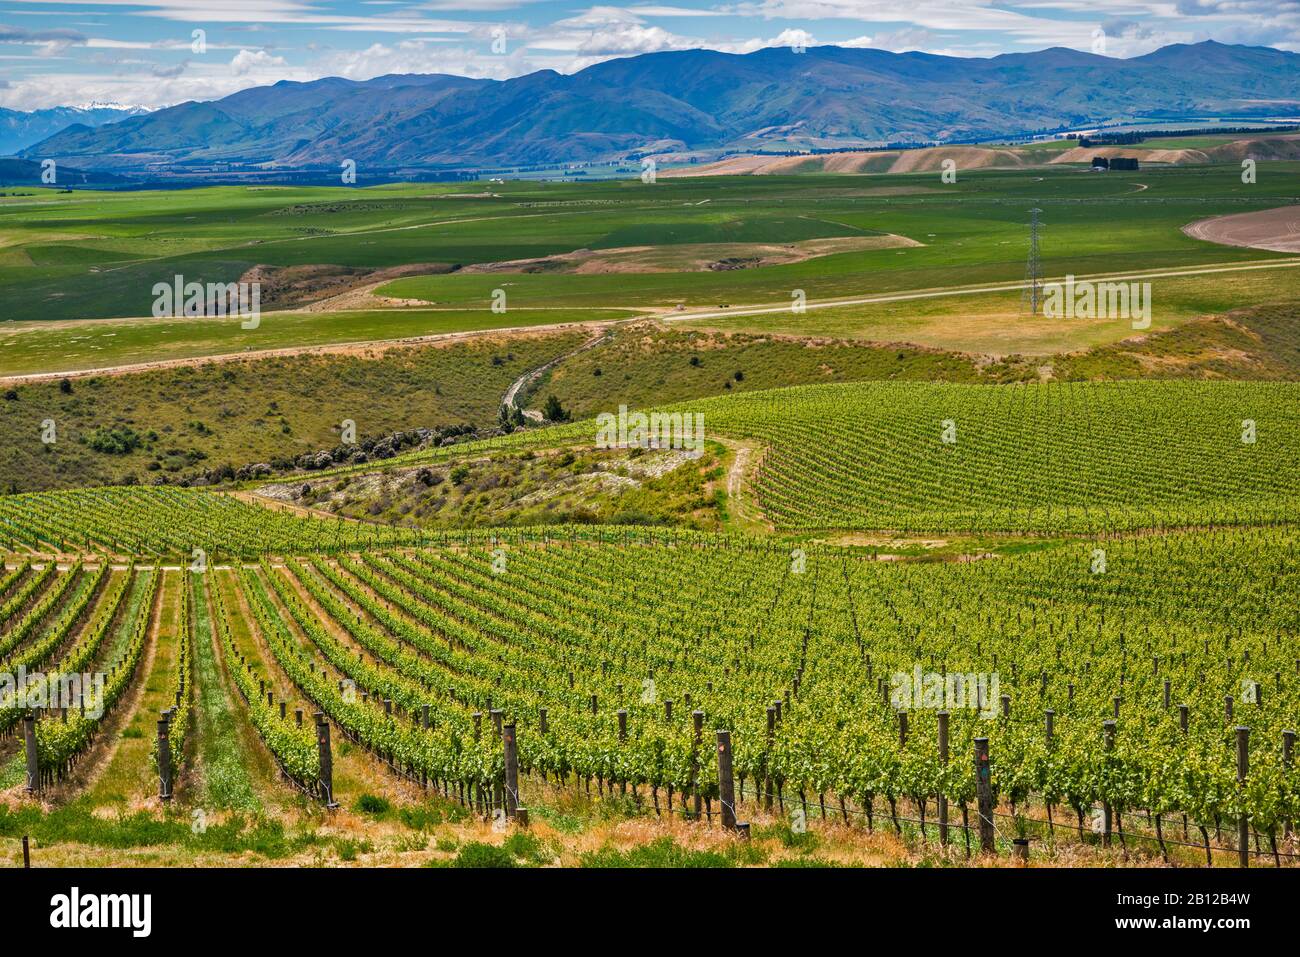 Vineyards of Central Otago area, Clutha River Valley, view from Bendigo Loop Road, Otago Region, South Island, New Zealand Stock Photo